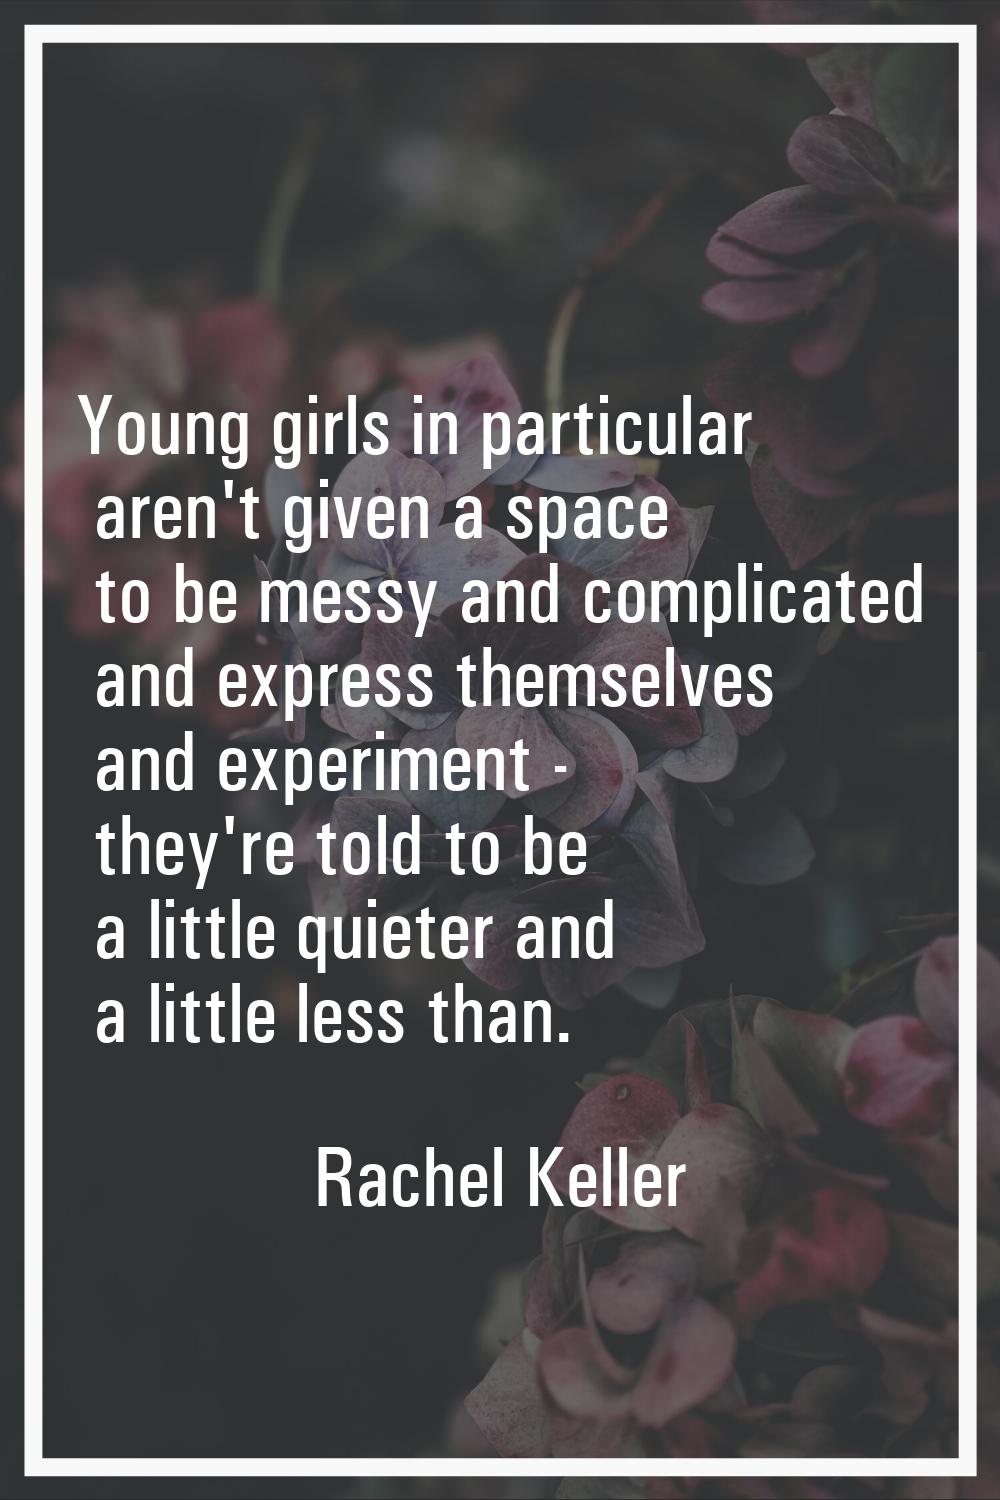 Young girls in particular aren't given a space to be messy and complicated and express themselves a